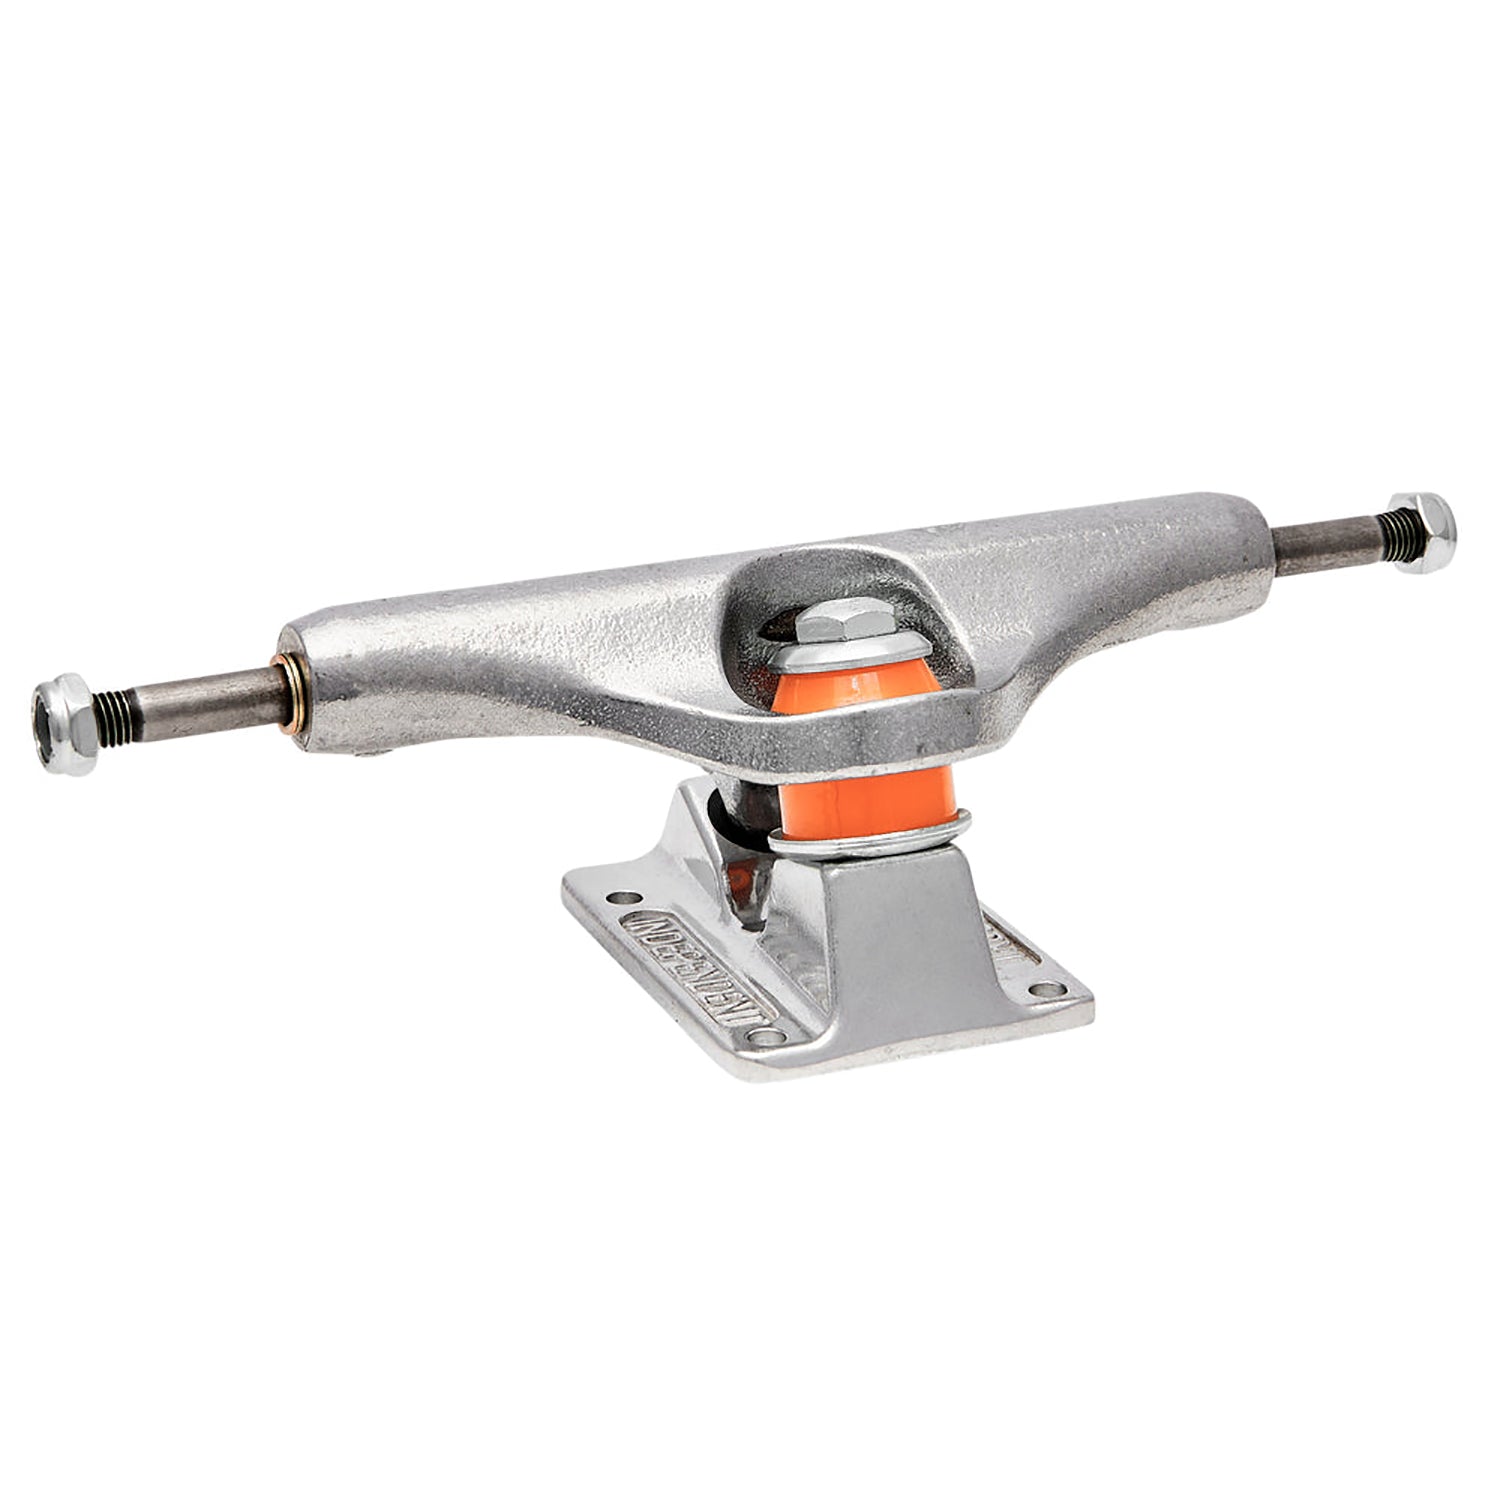 Independent Forged Hollow Mid Trucks (Sold As A Single Truck)